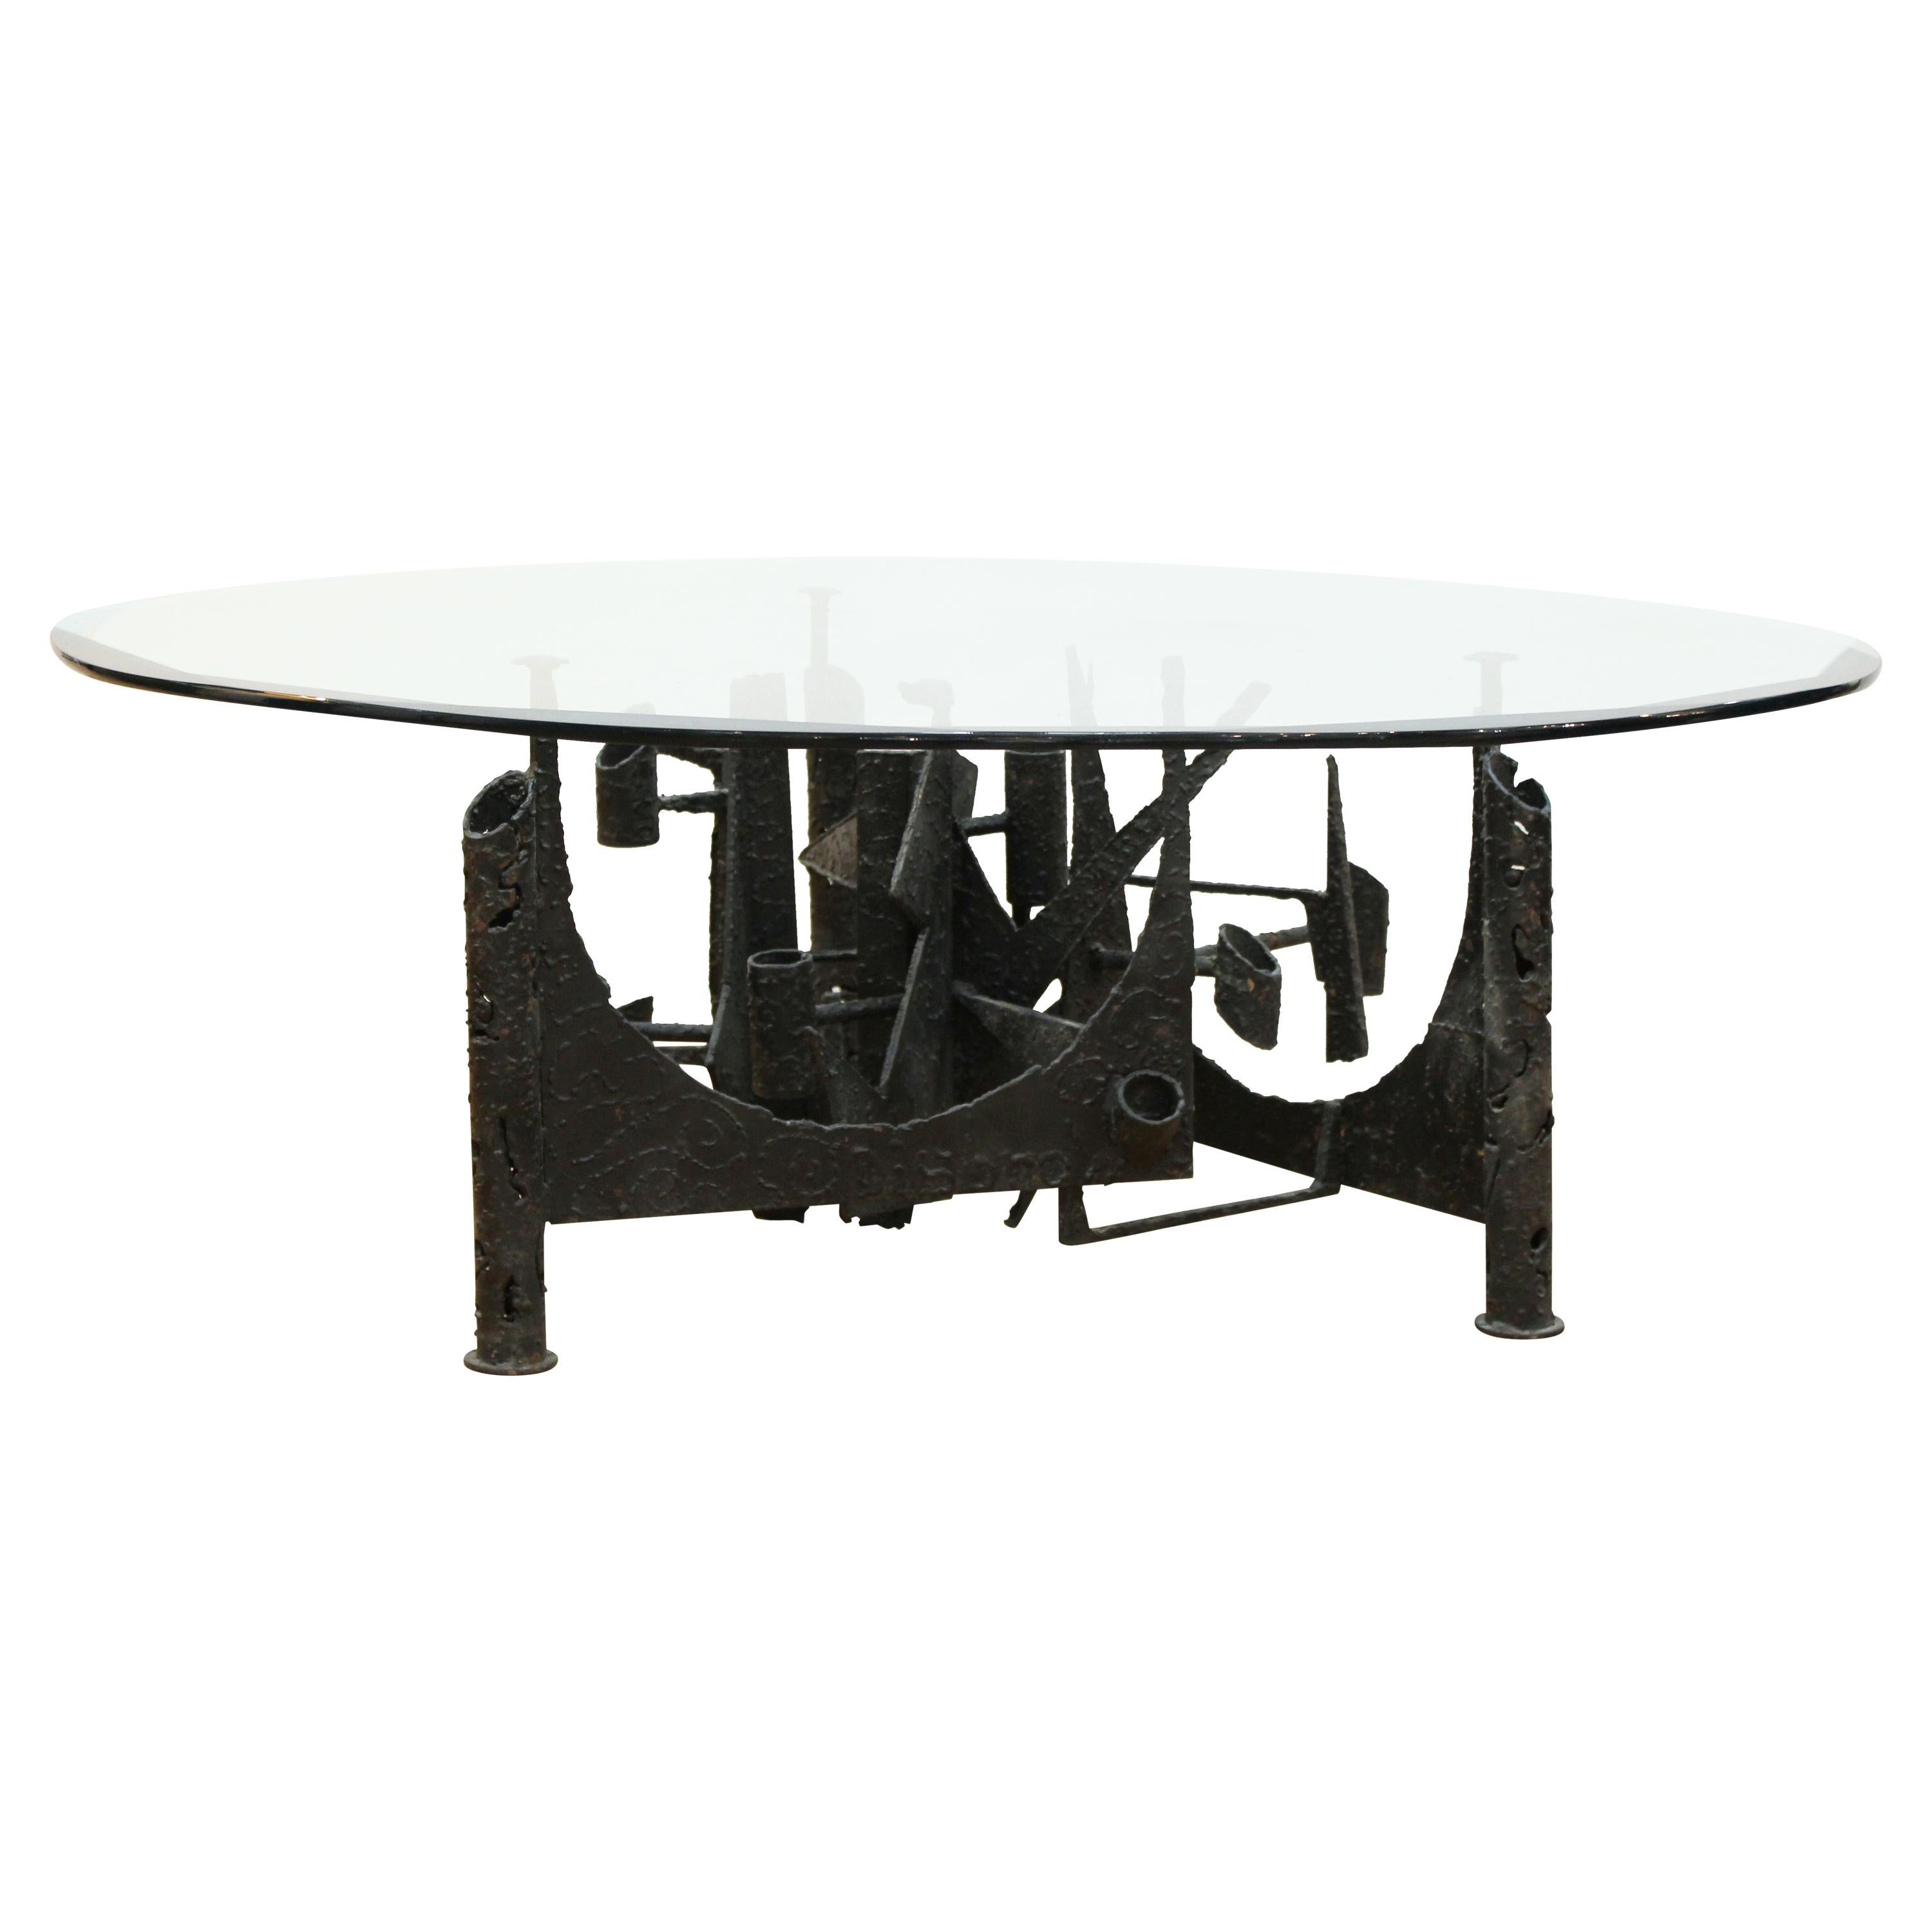 Brutalist Modern Welded Metal Coffee Table with Beveled Round Glass Top